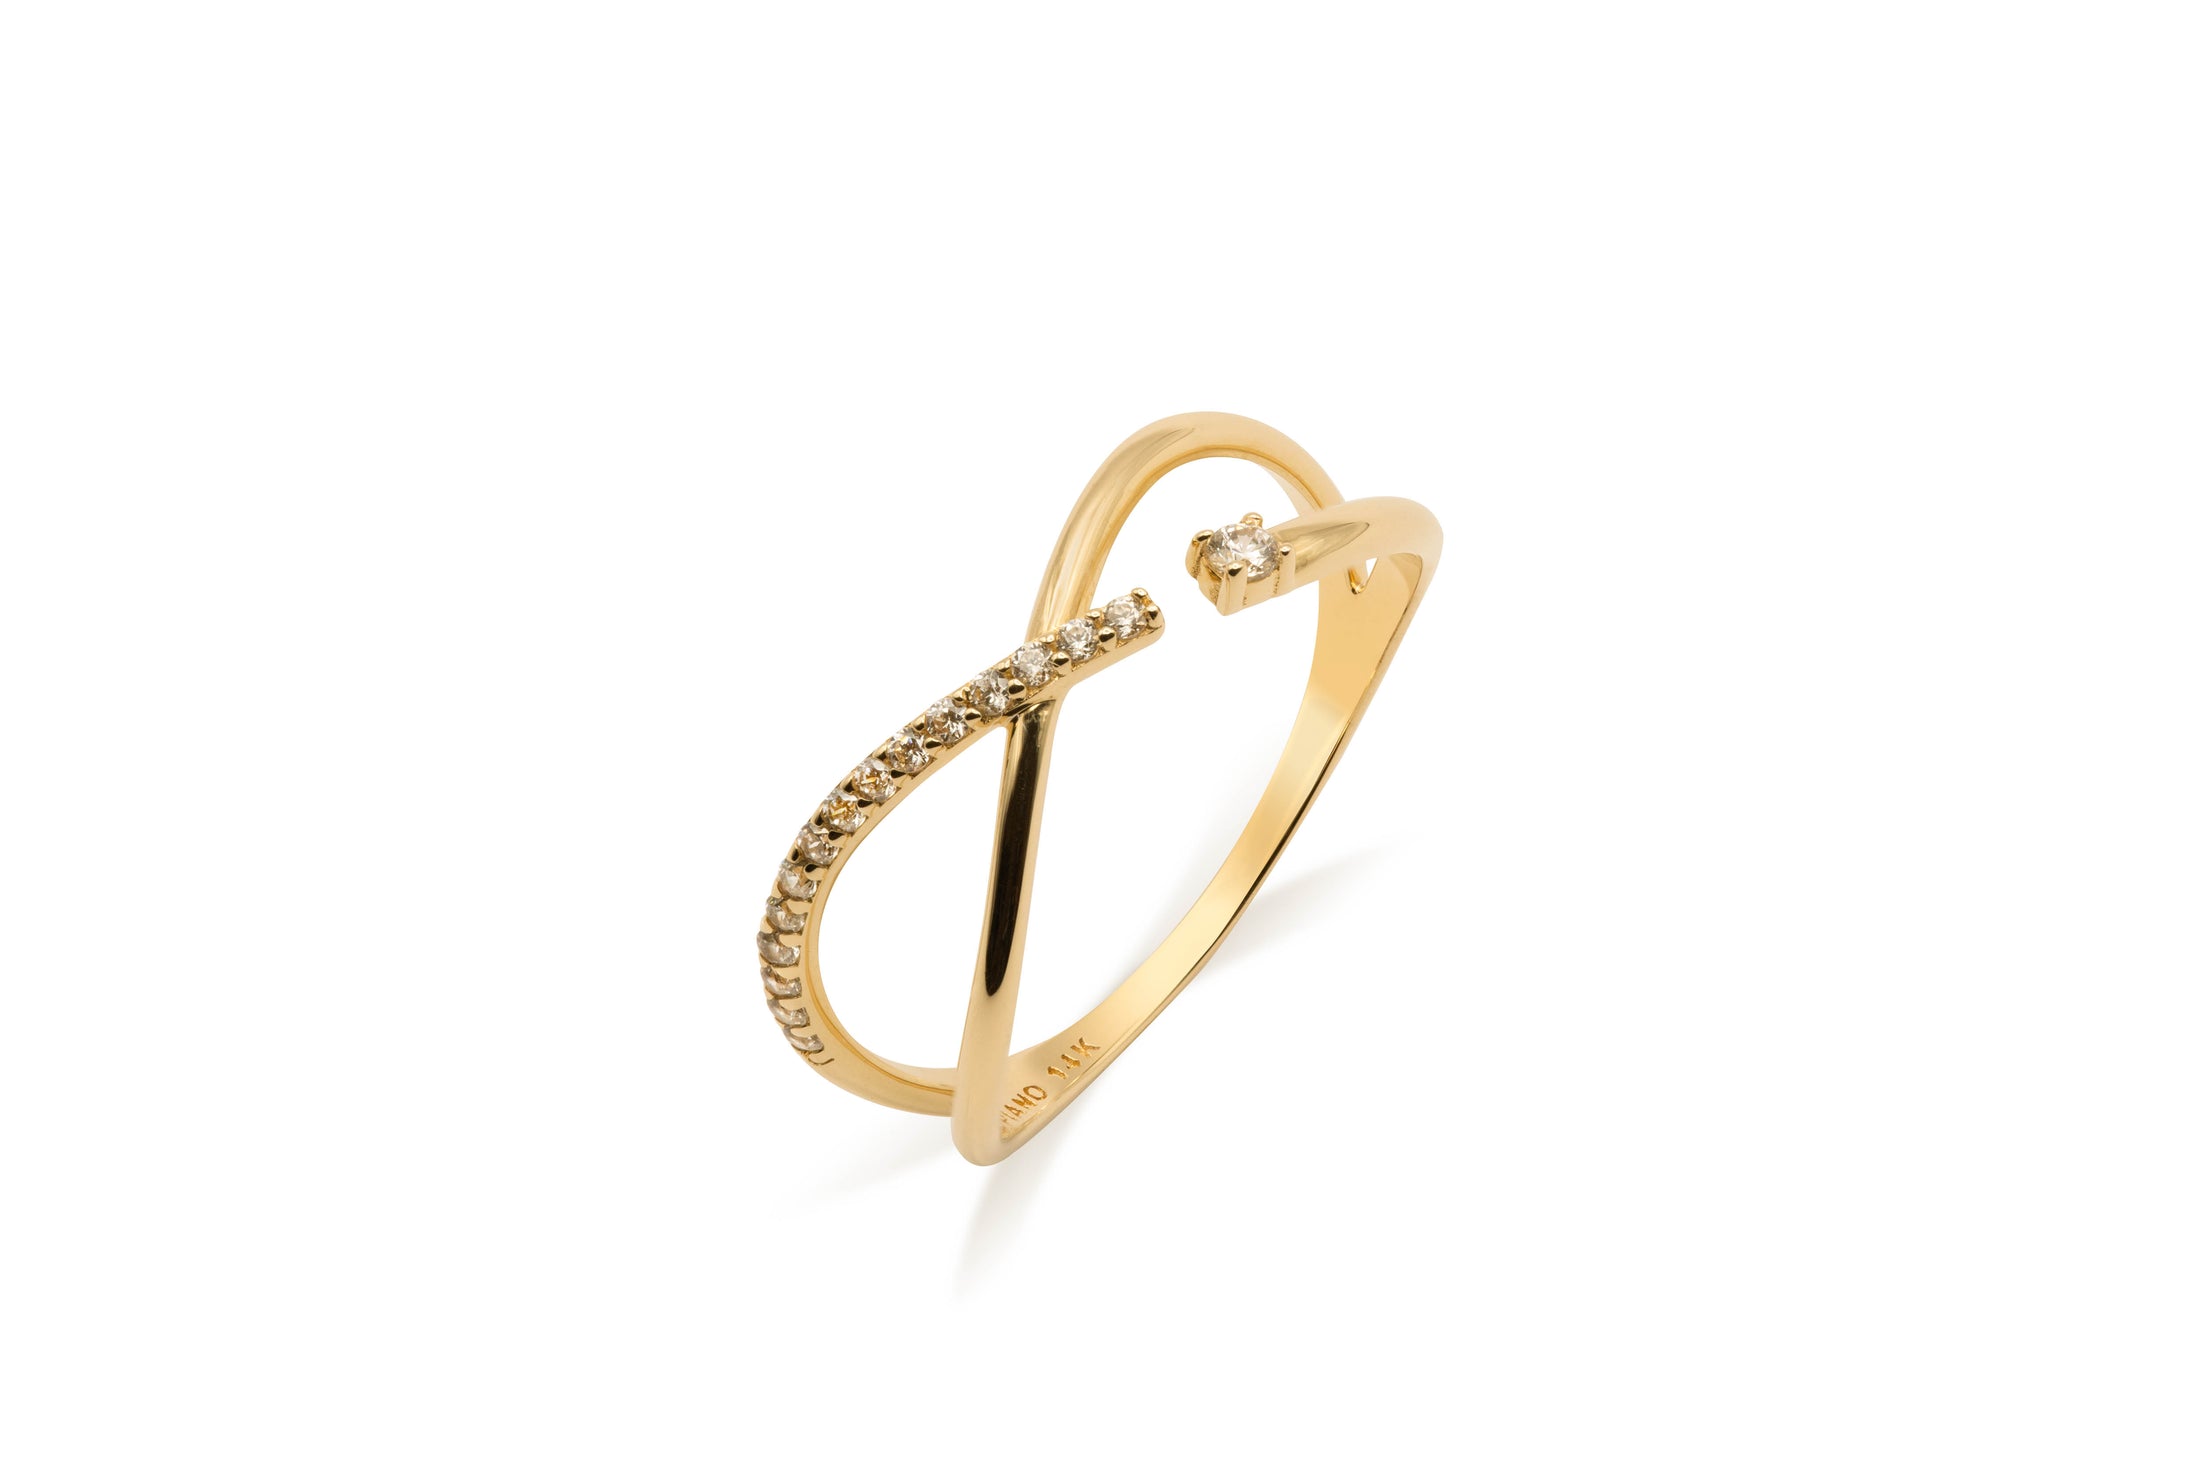 Golden Embrace 14K Solid Gold Crossover Ring with Stones